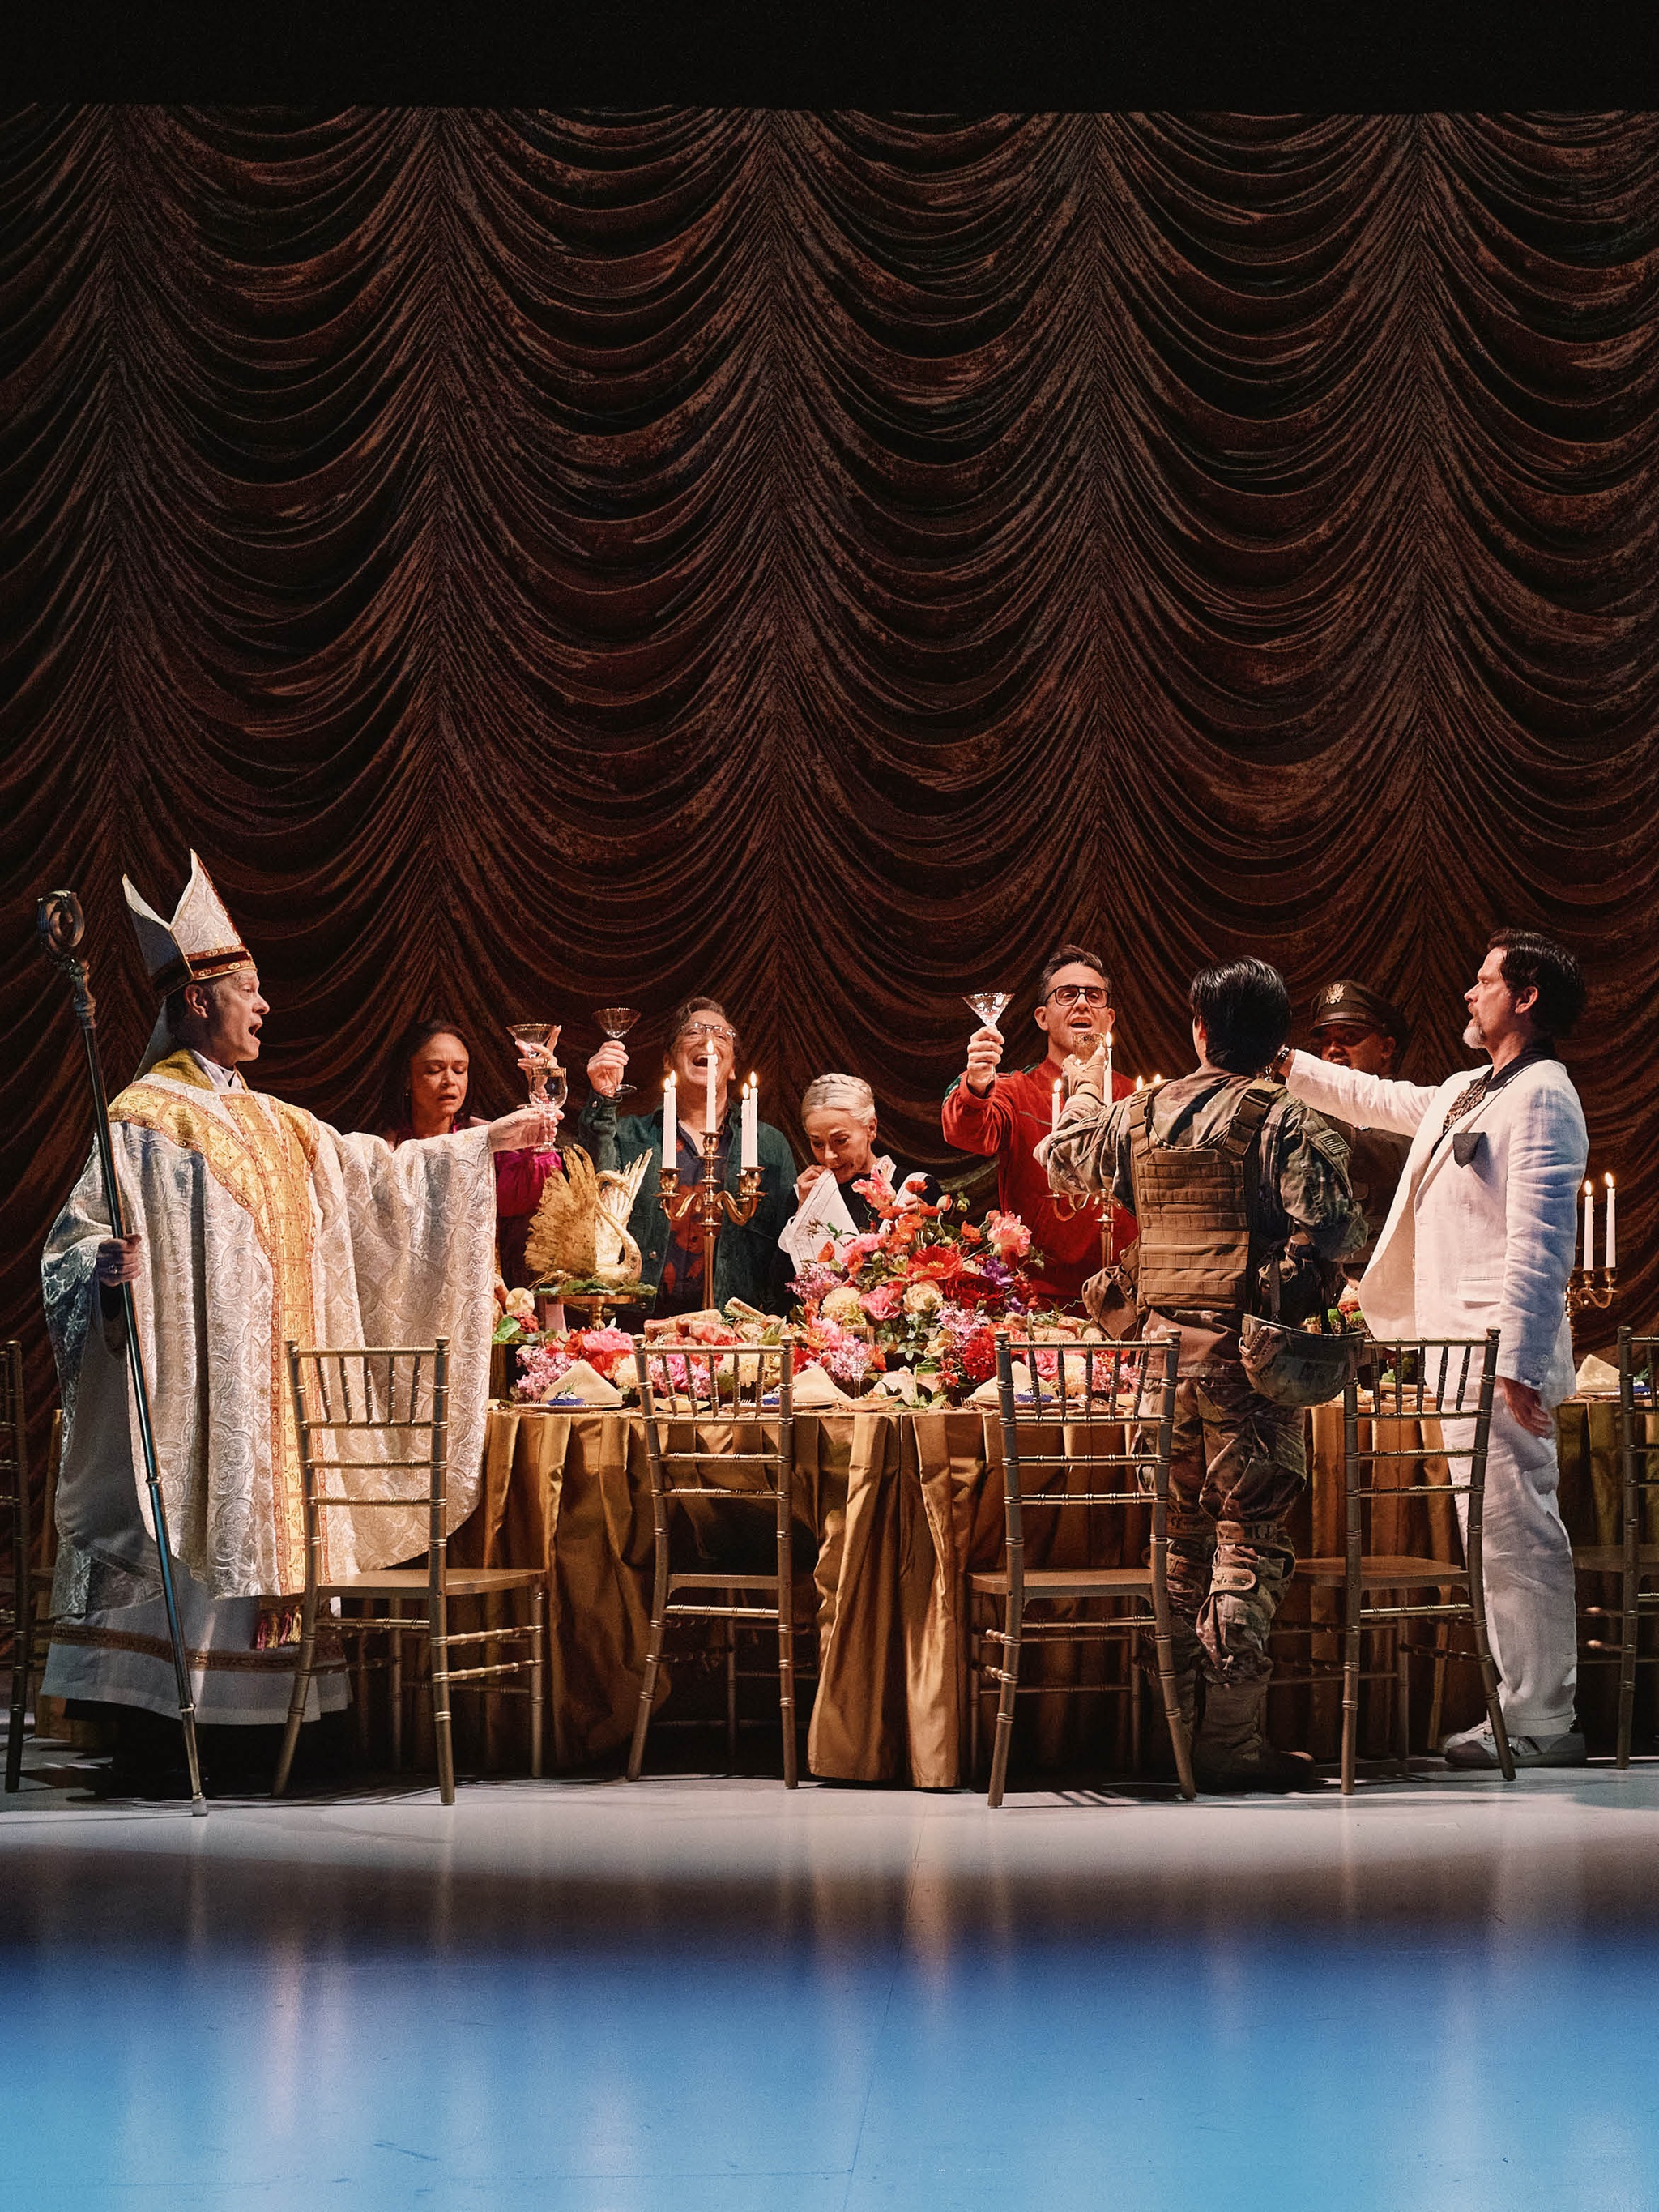 The cast of a play dressed as members of a dinner party lift glasses in a toast as they stand around a long table. At one end stands a guest dressed in white Catholic clerical robes and at the other end a man in a white suit stretches his arm out.